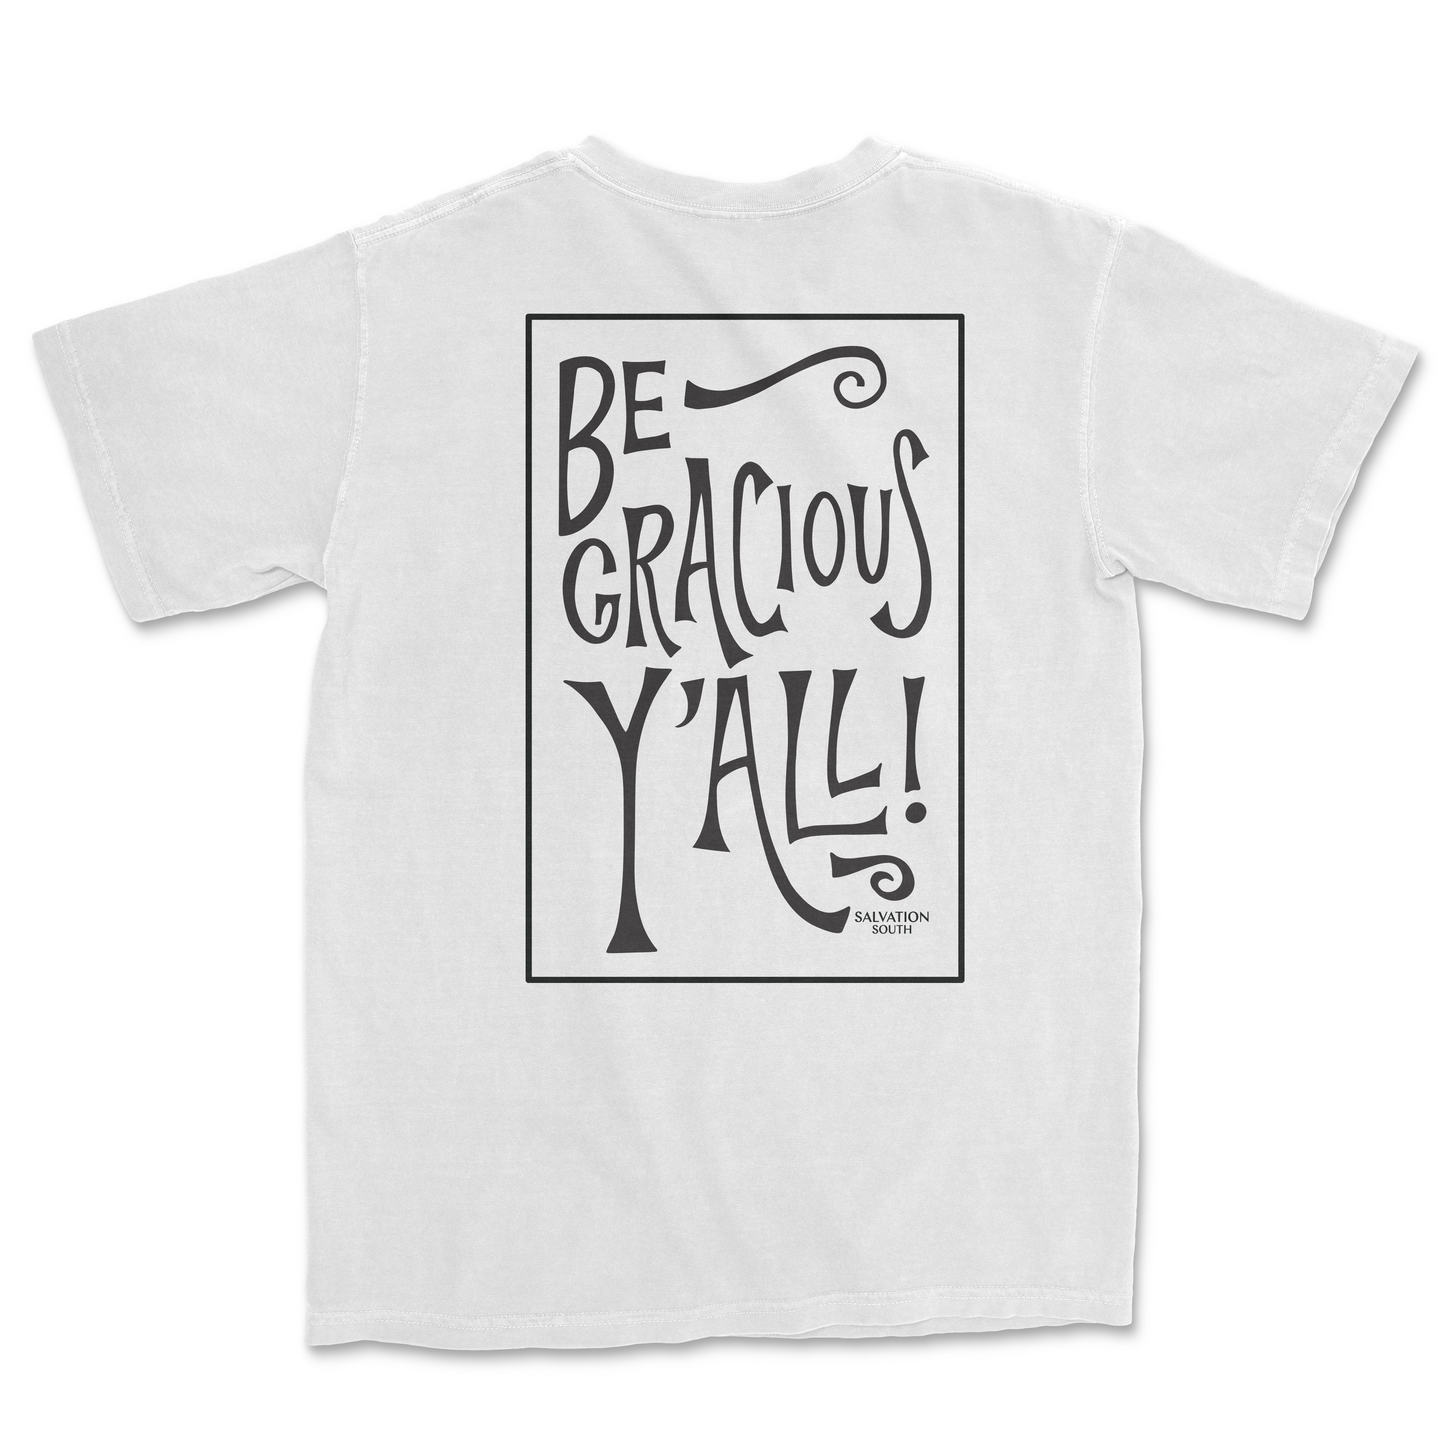 Salvation South - The Be Gracious Y'all T-shirt